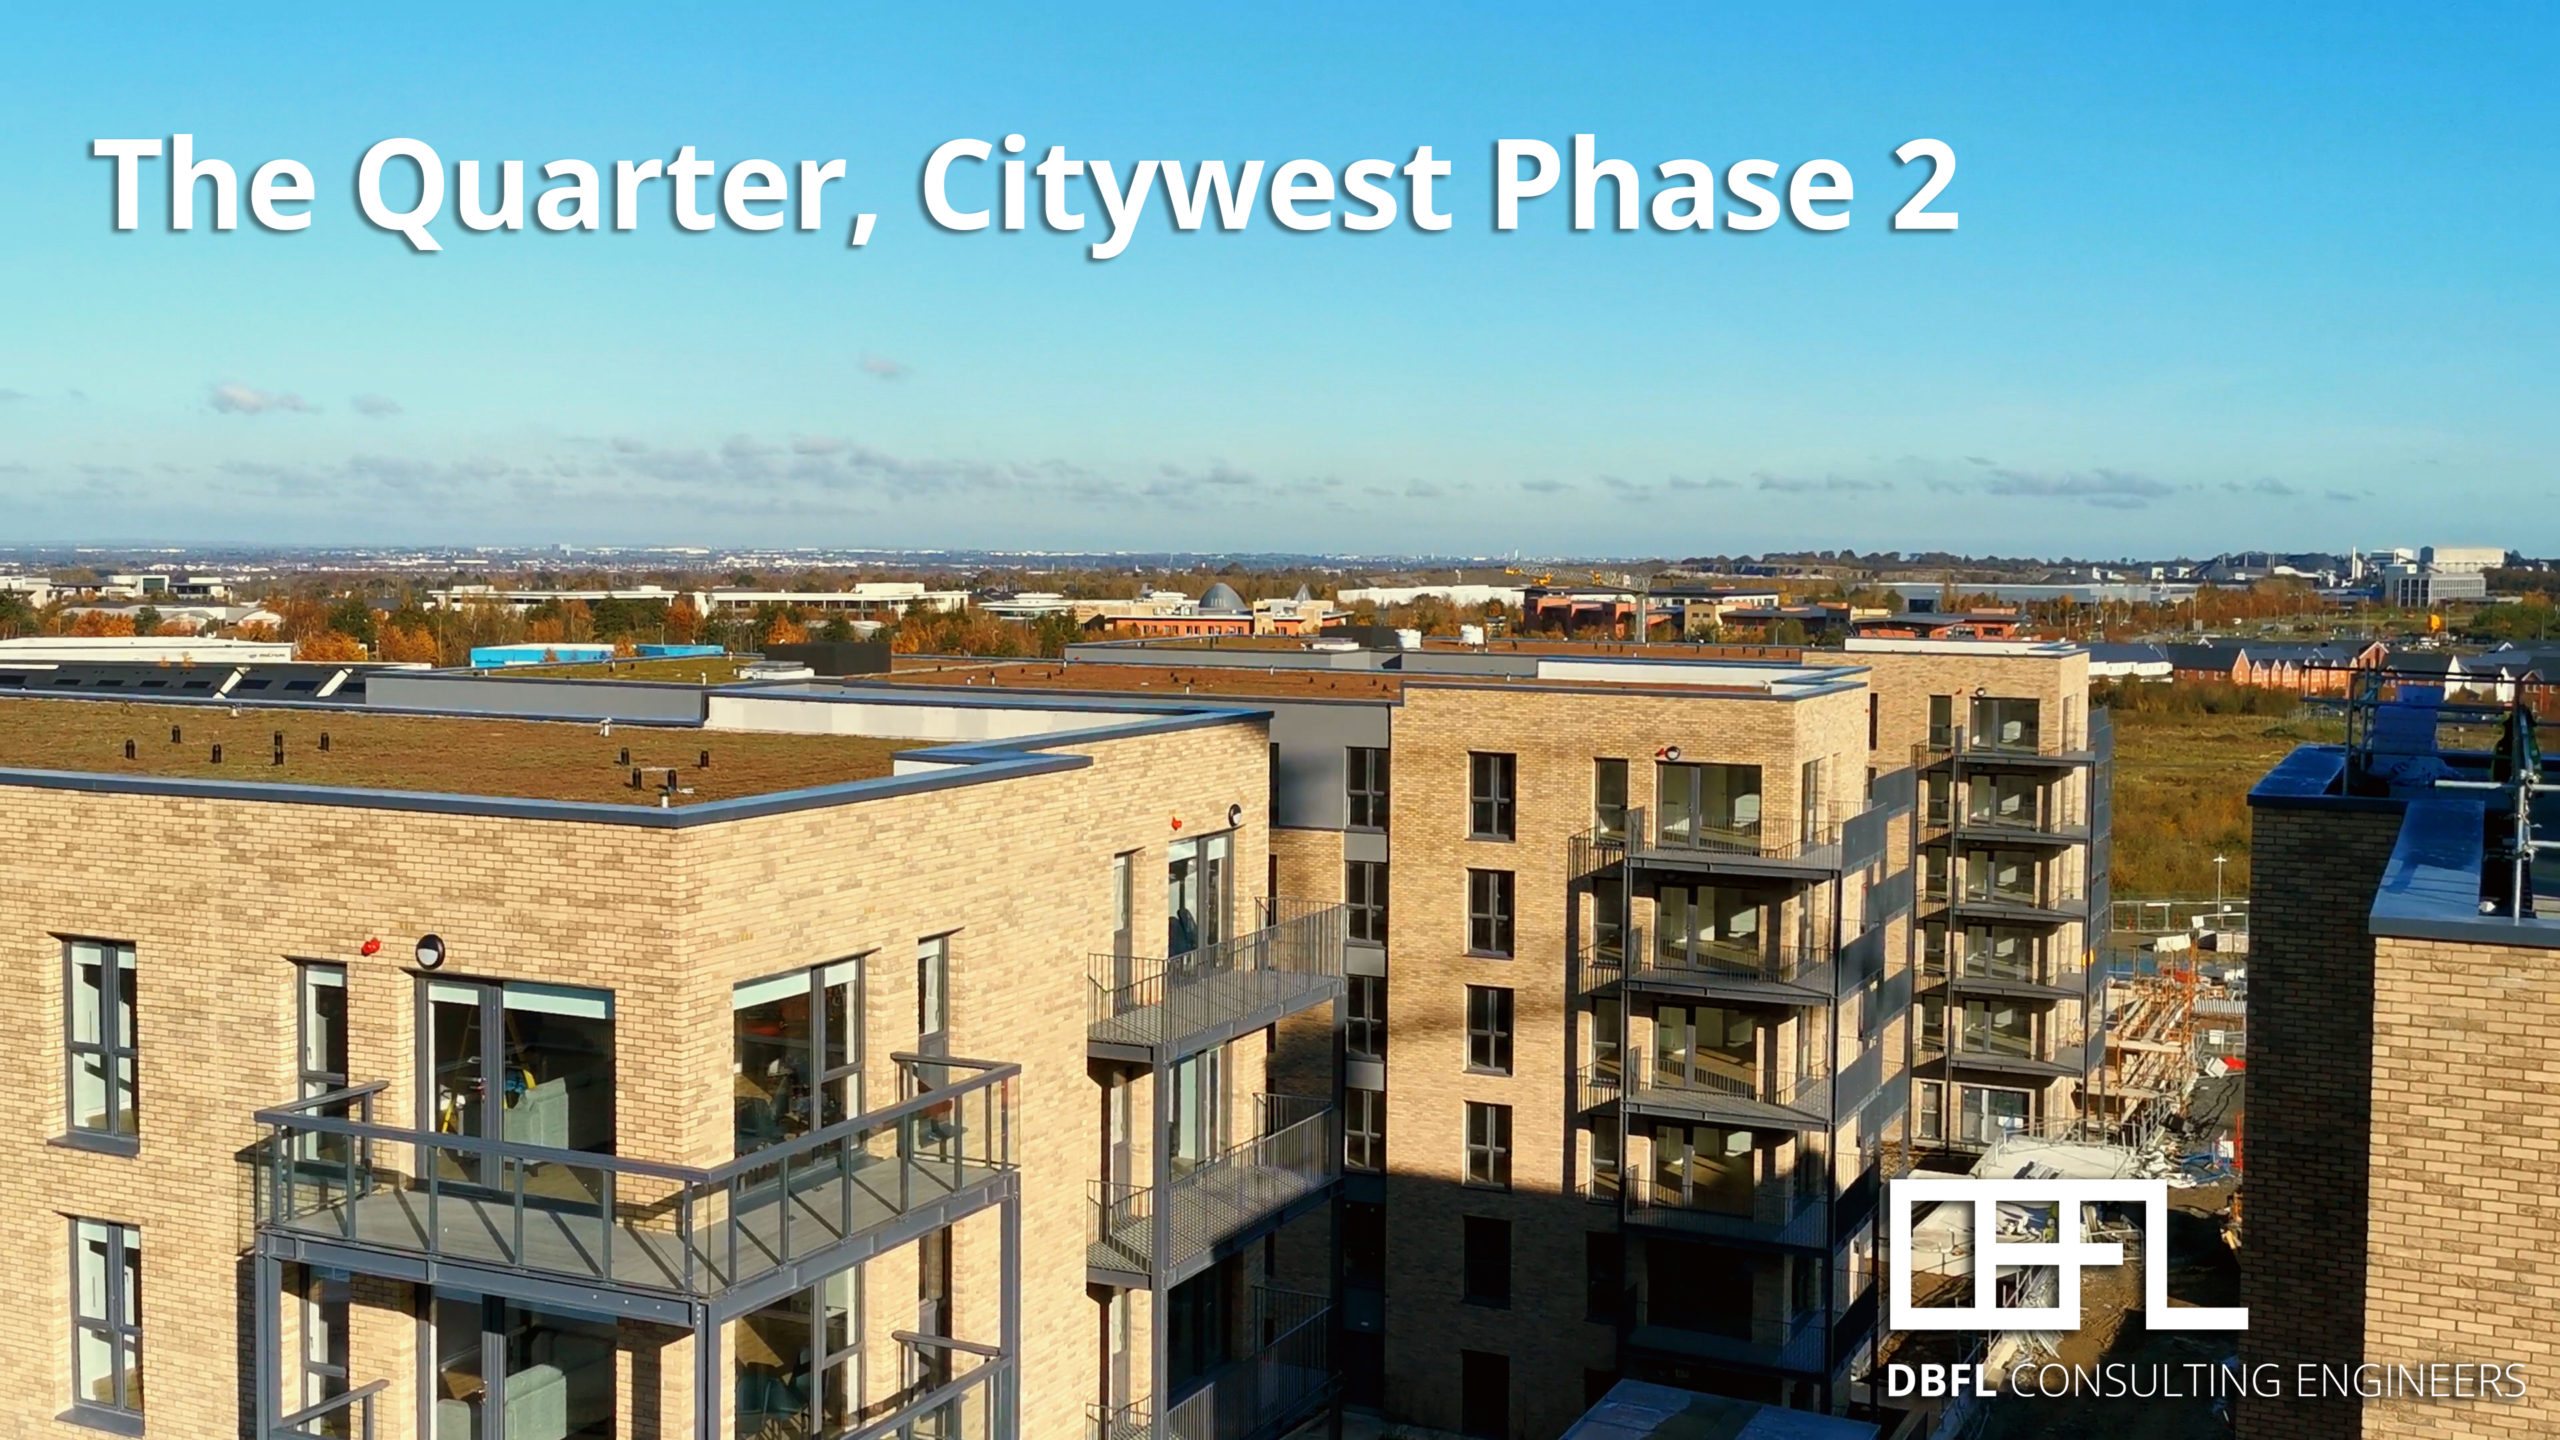 The Quarter, Citywest Phase 2